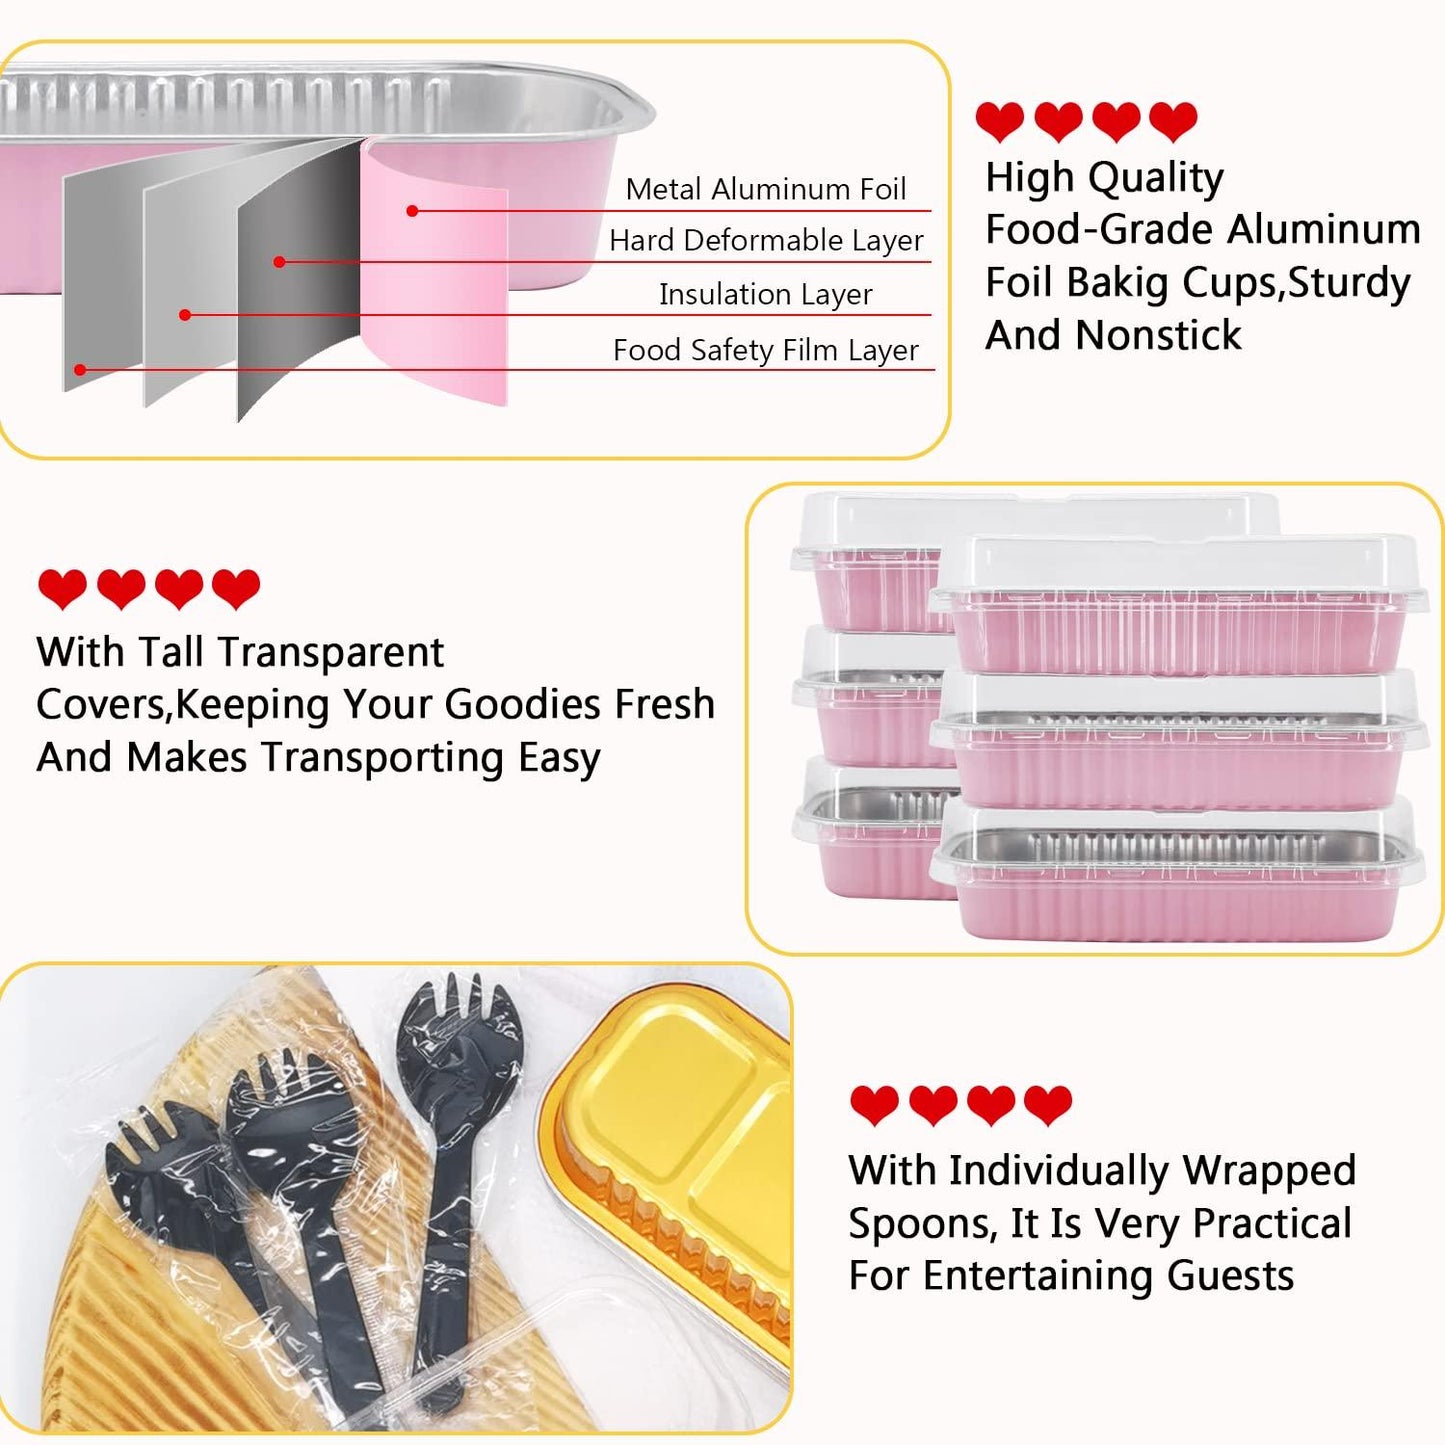 LNYZQUS Mini Loaf Pans With Lids 50 Pack, 6.8oz Rectangle Aluminum Foil Baking Pans Tins Containers,Disposable Ramekins Baking Cups Muffin Tins Cupcake Cups For Mini Cake Bread Loaf -Pink - CookCave